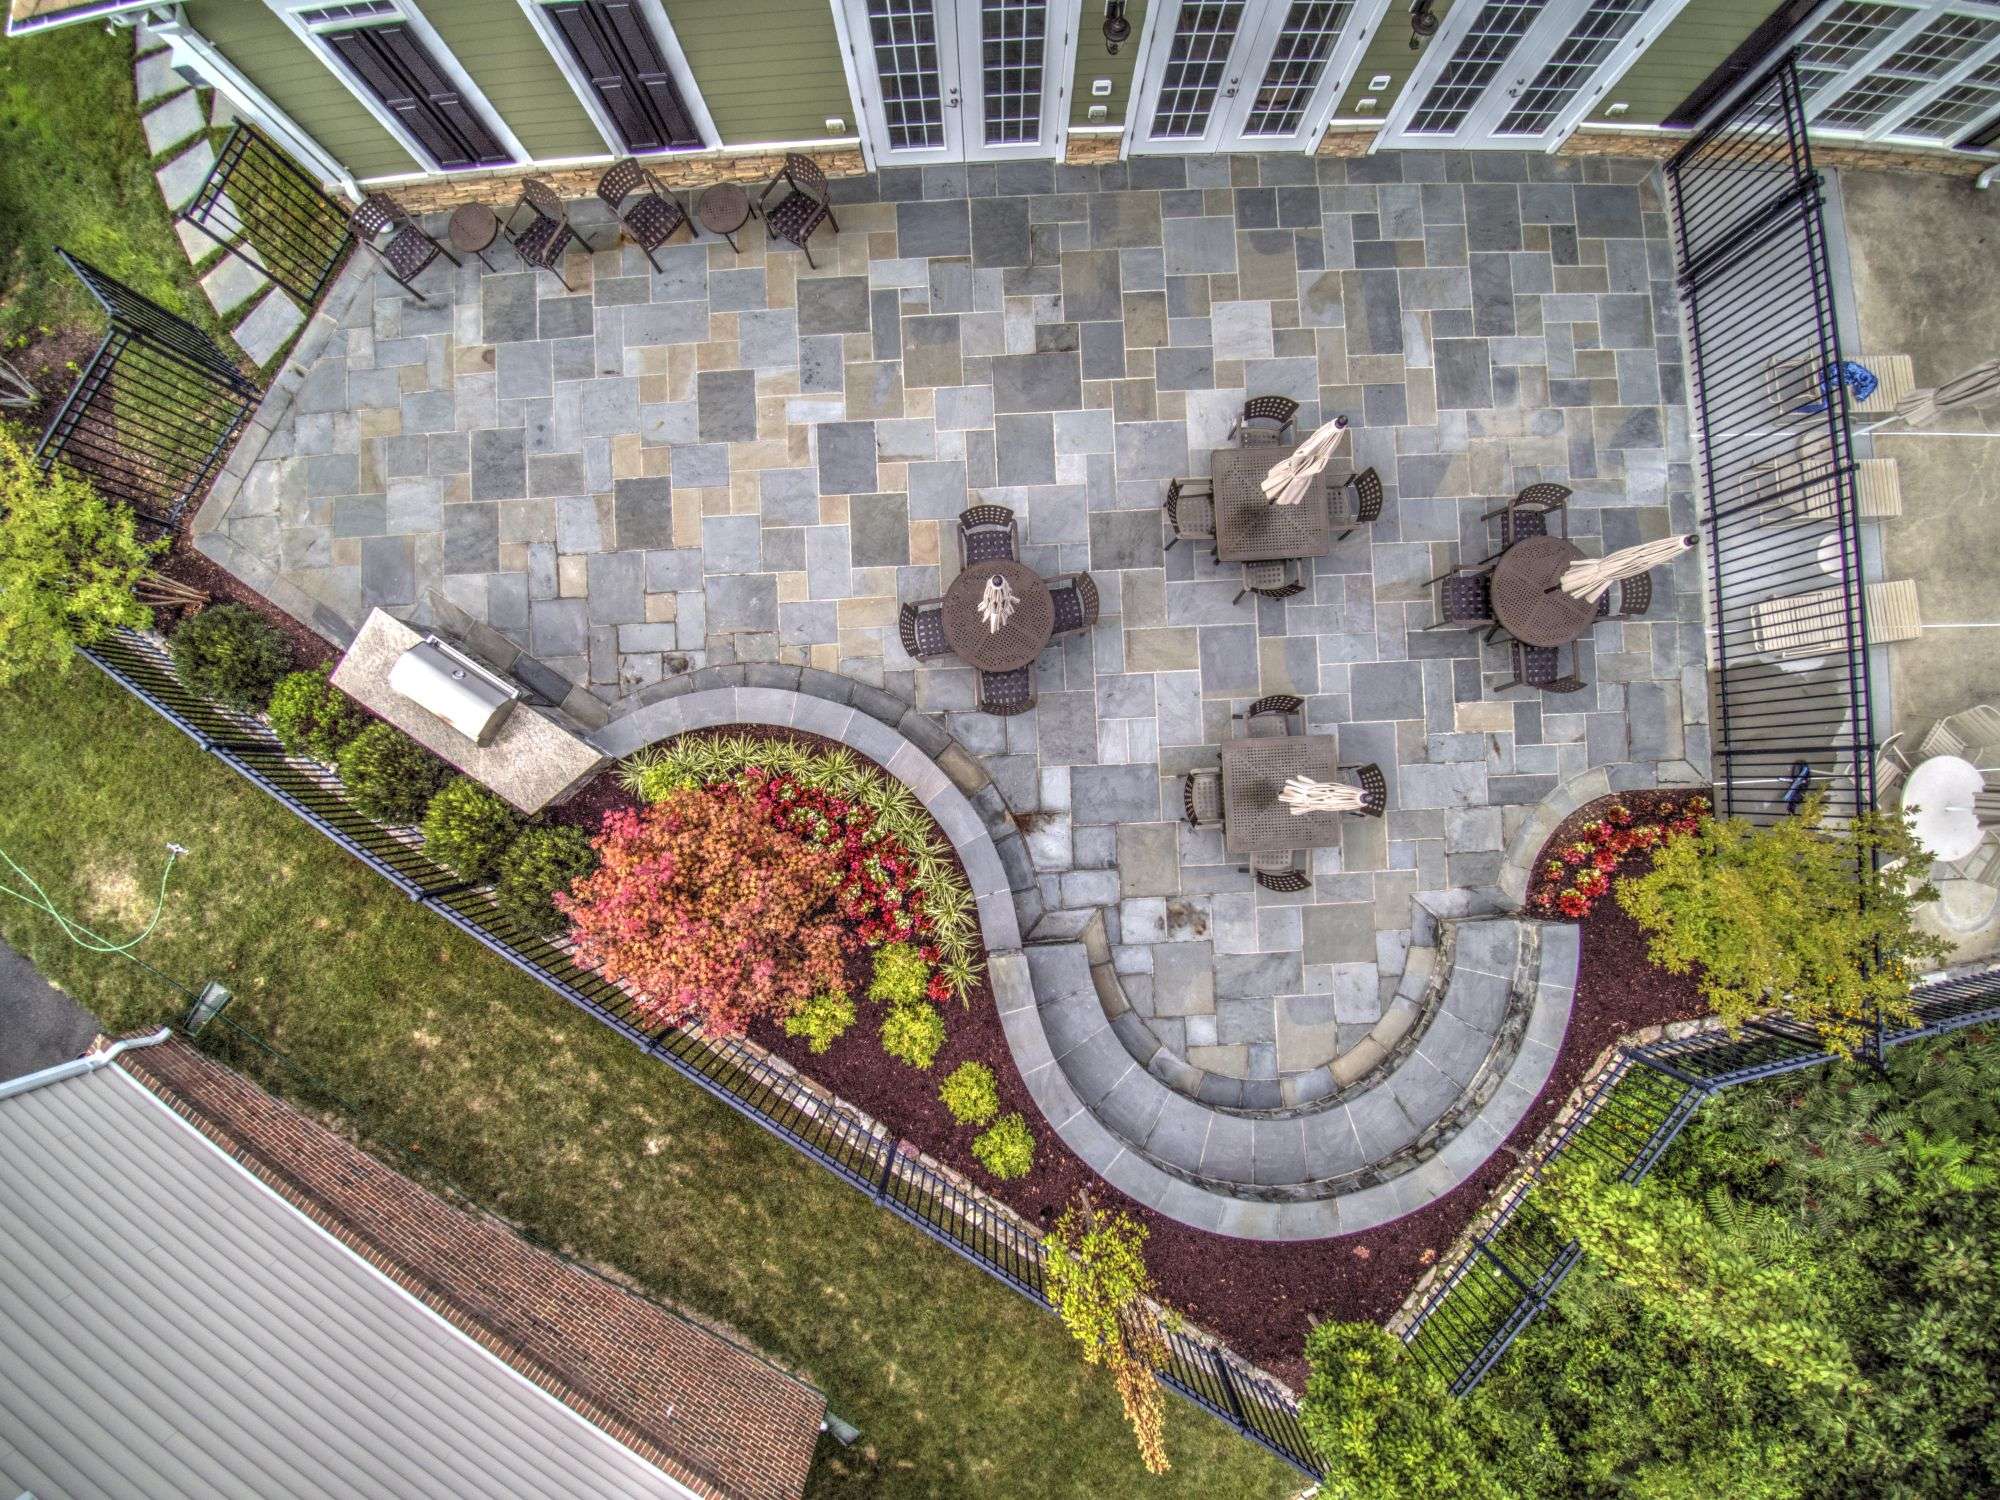 aerial photo of patio with outdoor kitchen and seating area